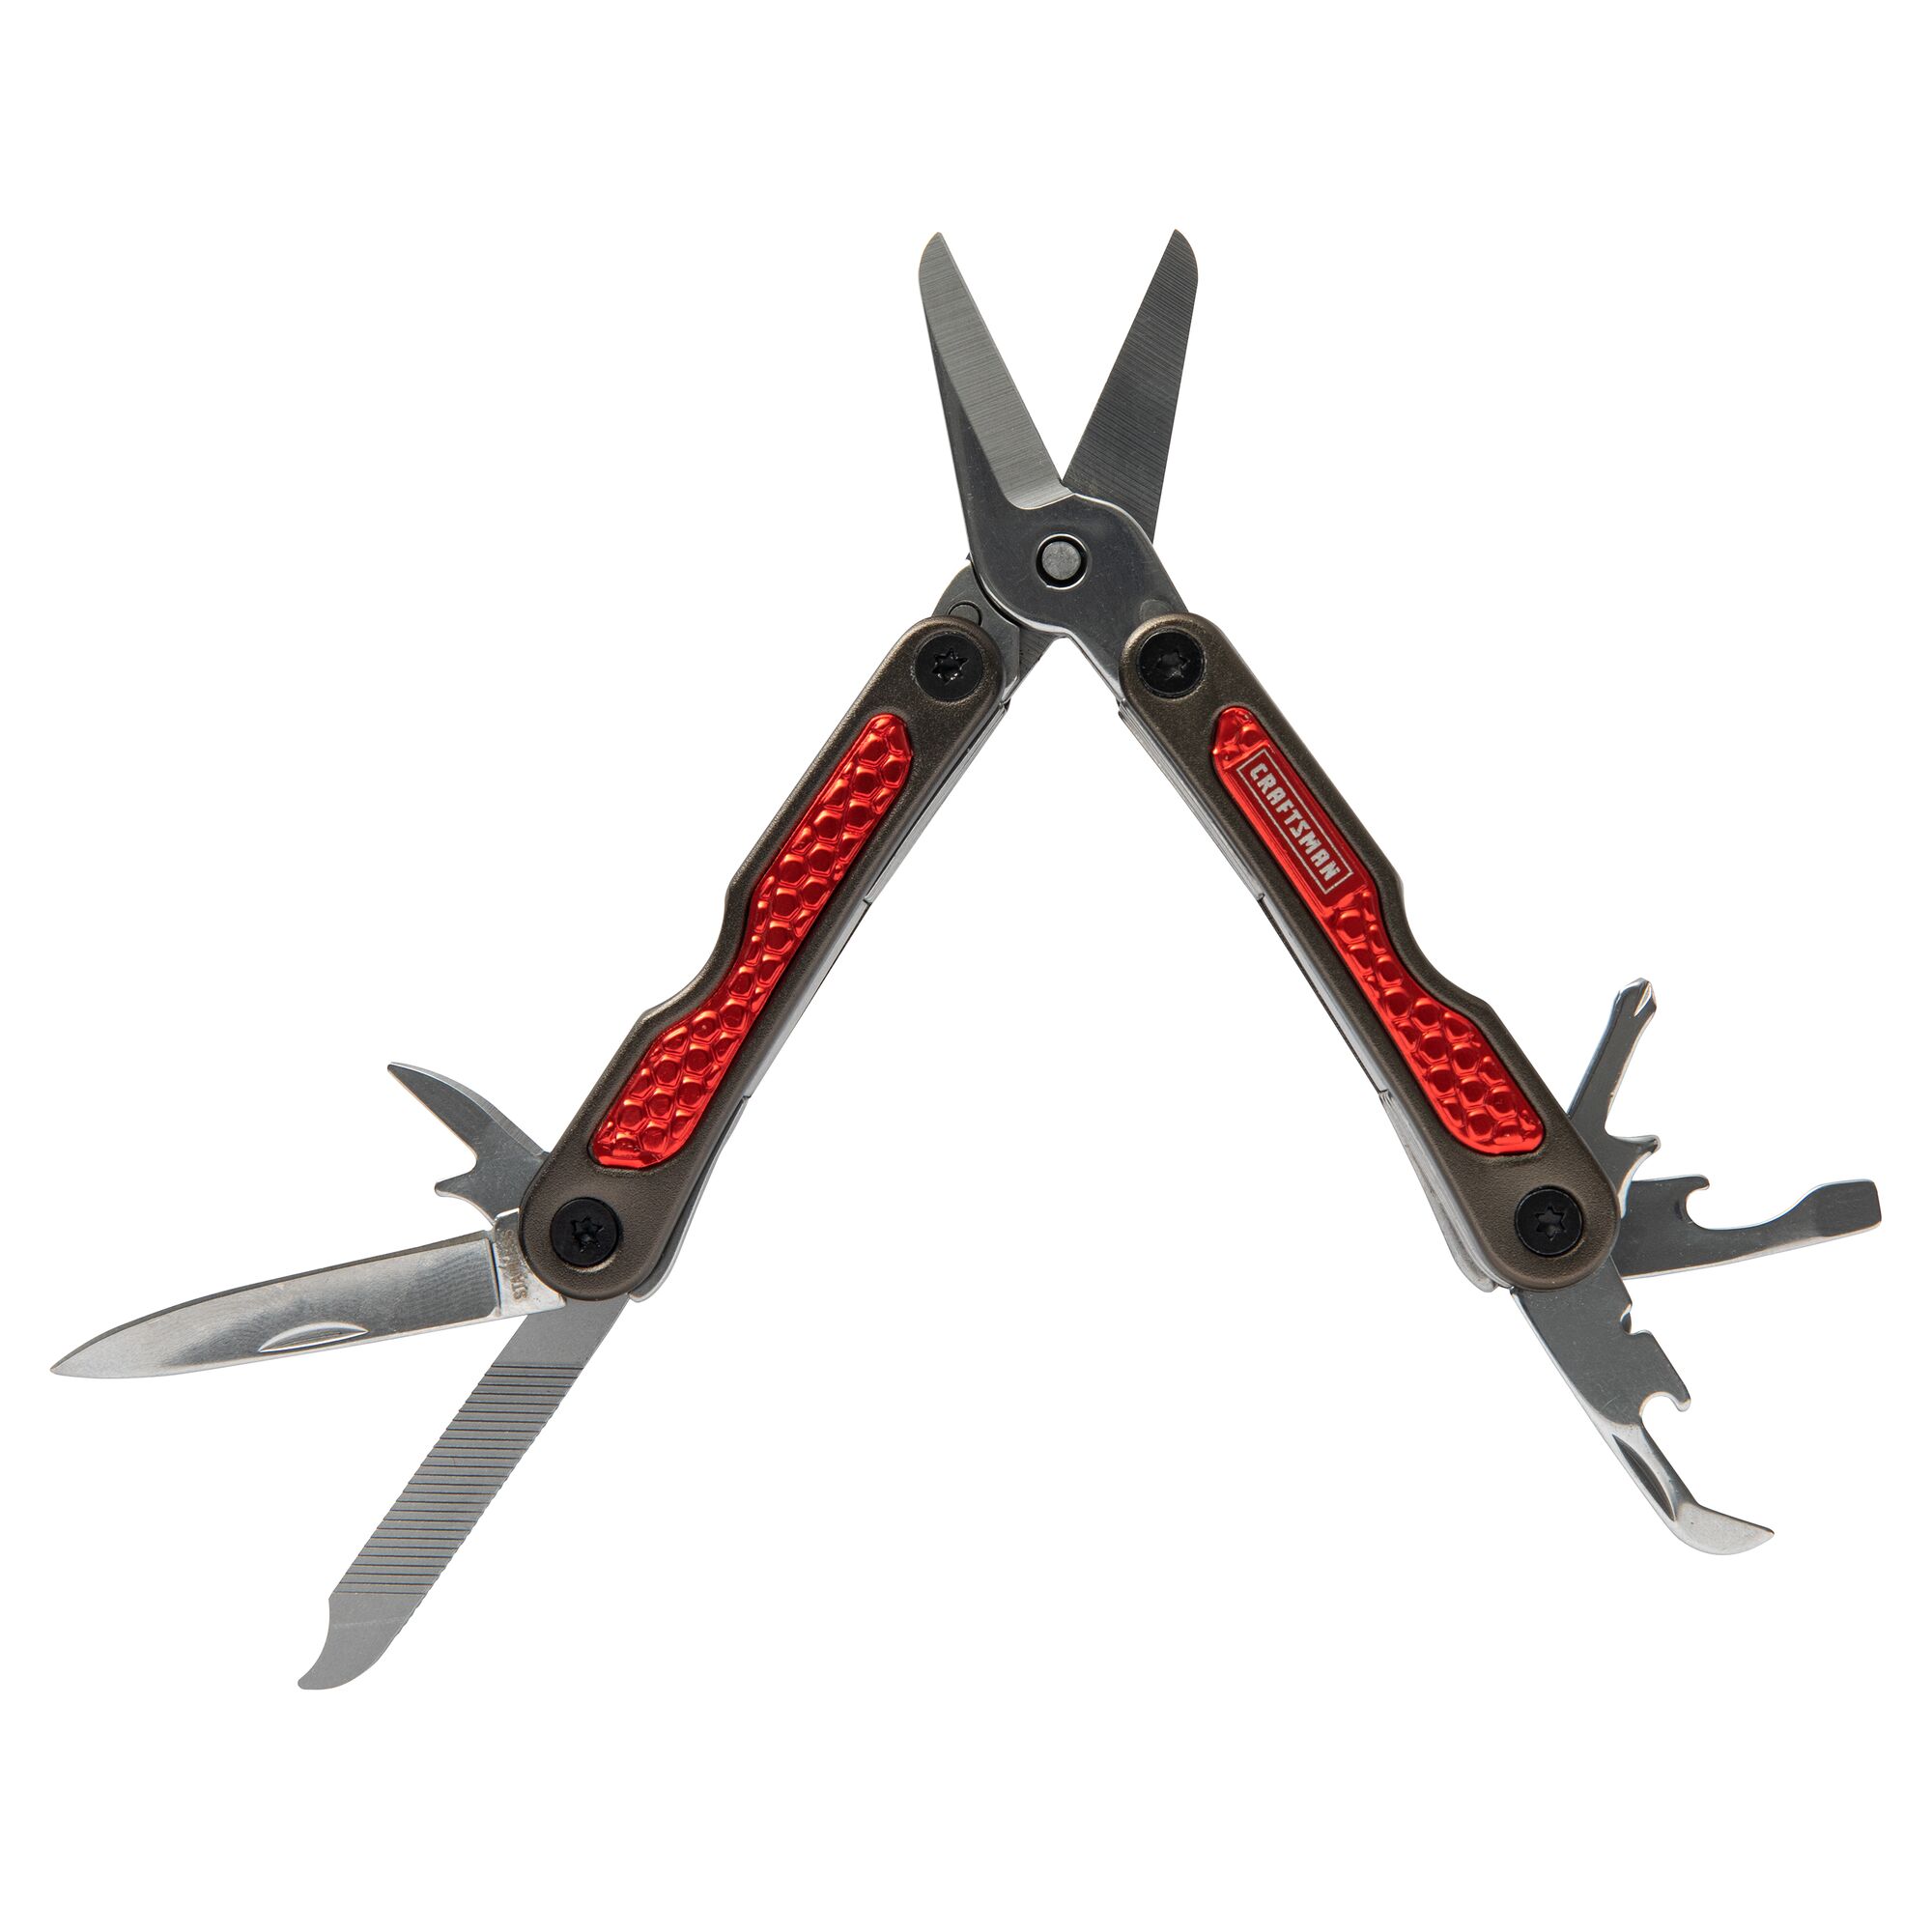 View of CRAFTSMAN Multi-Tools on white background